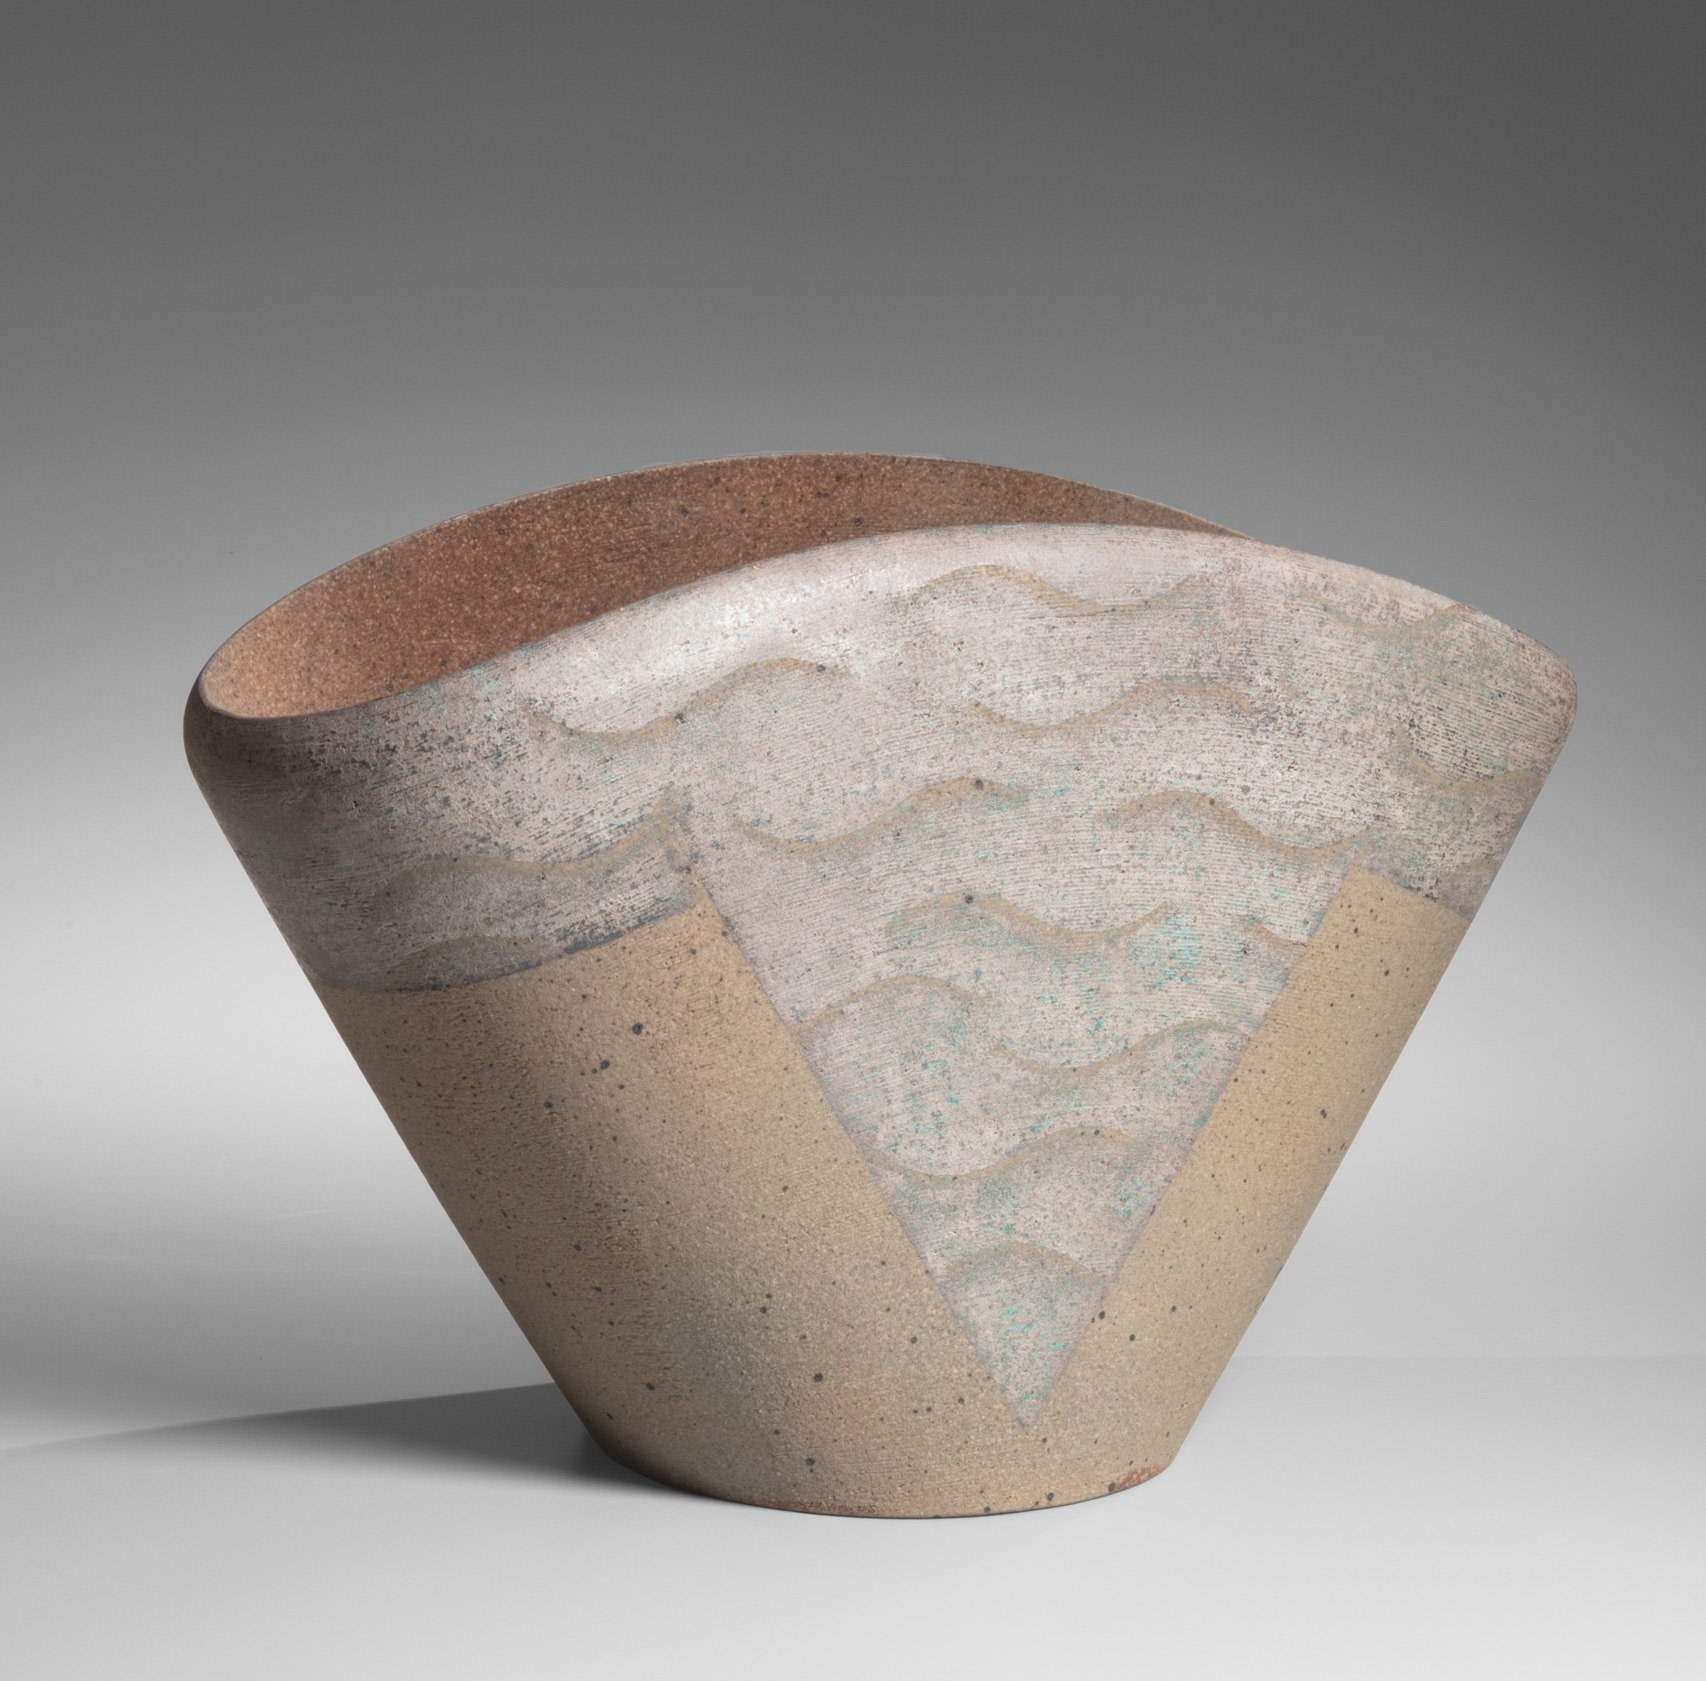 Fan-shaped slightly flattened vessel decorated with abstract patterning, 1982